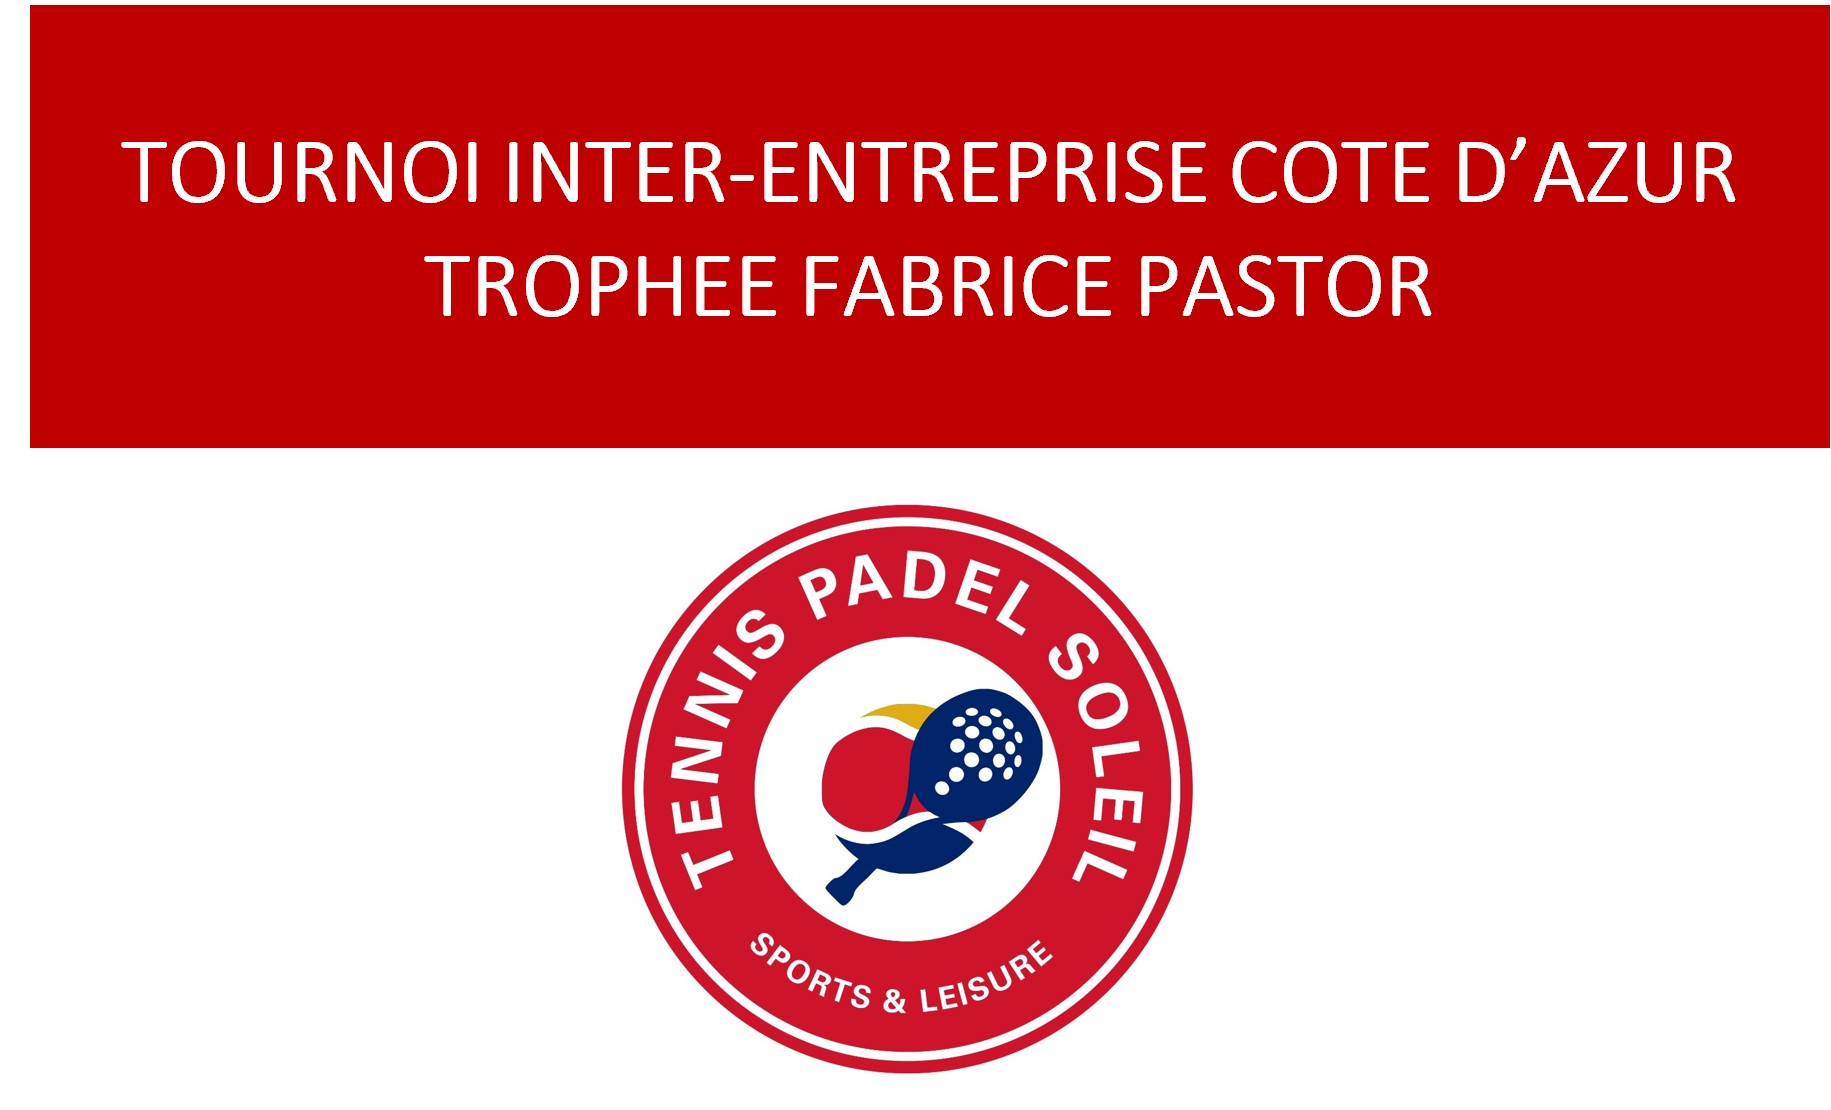 Inter-company toernooi Cote d'Azur Trophy Fabrice Pastor